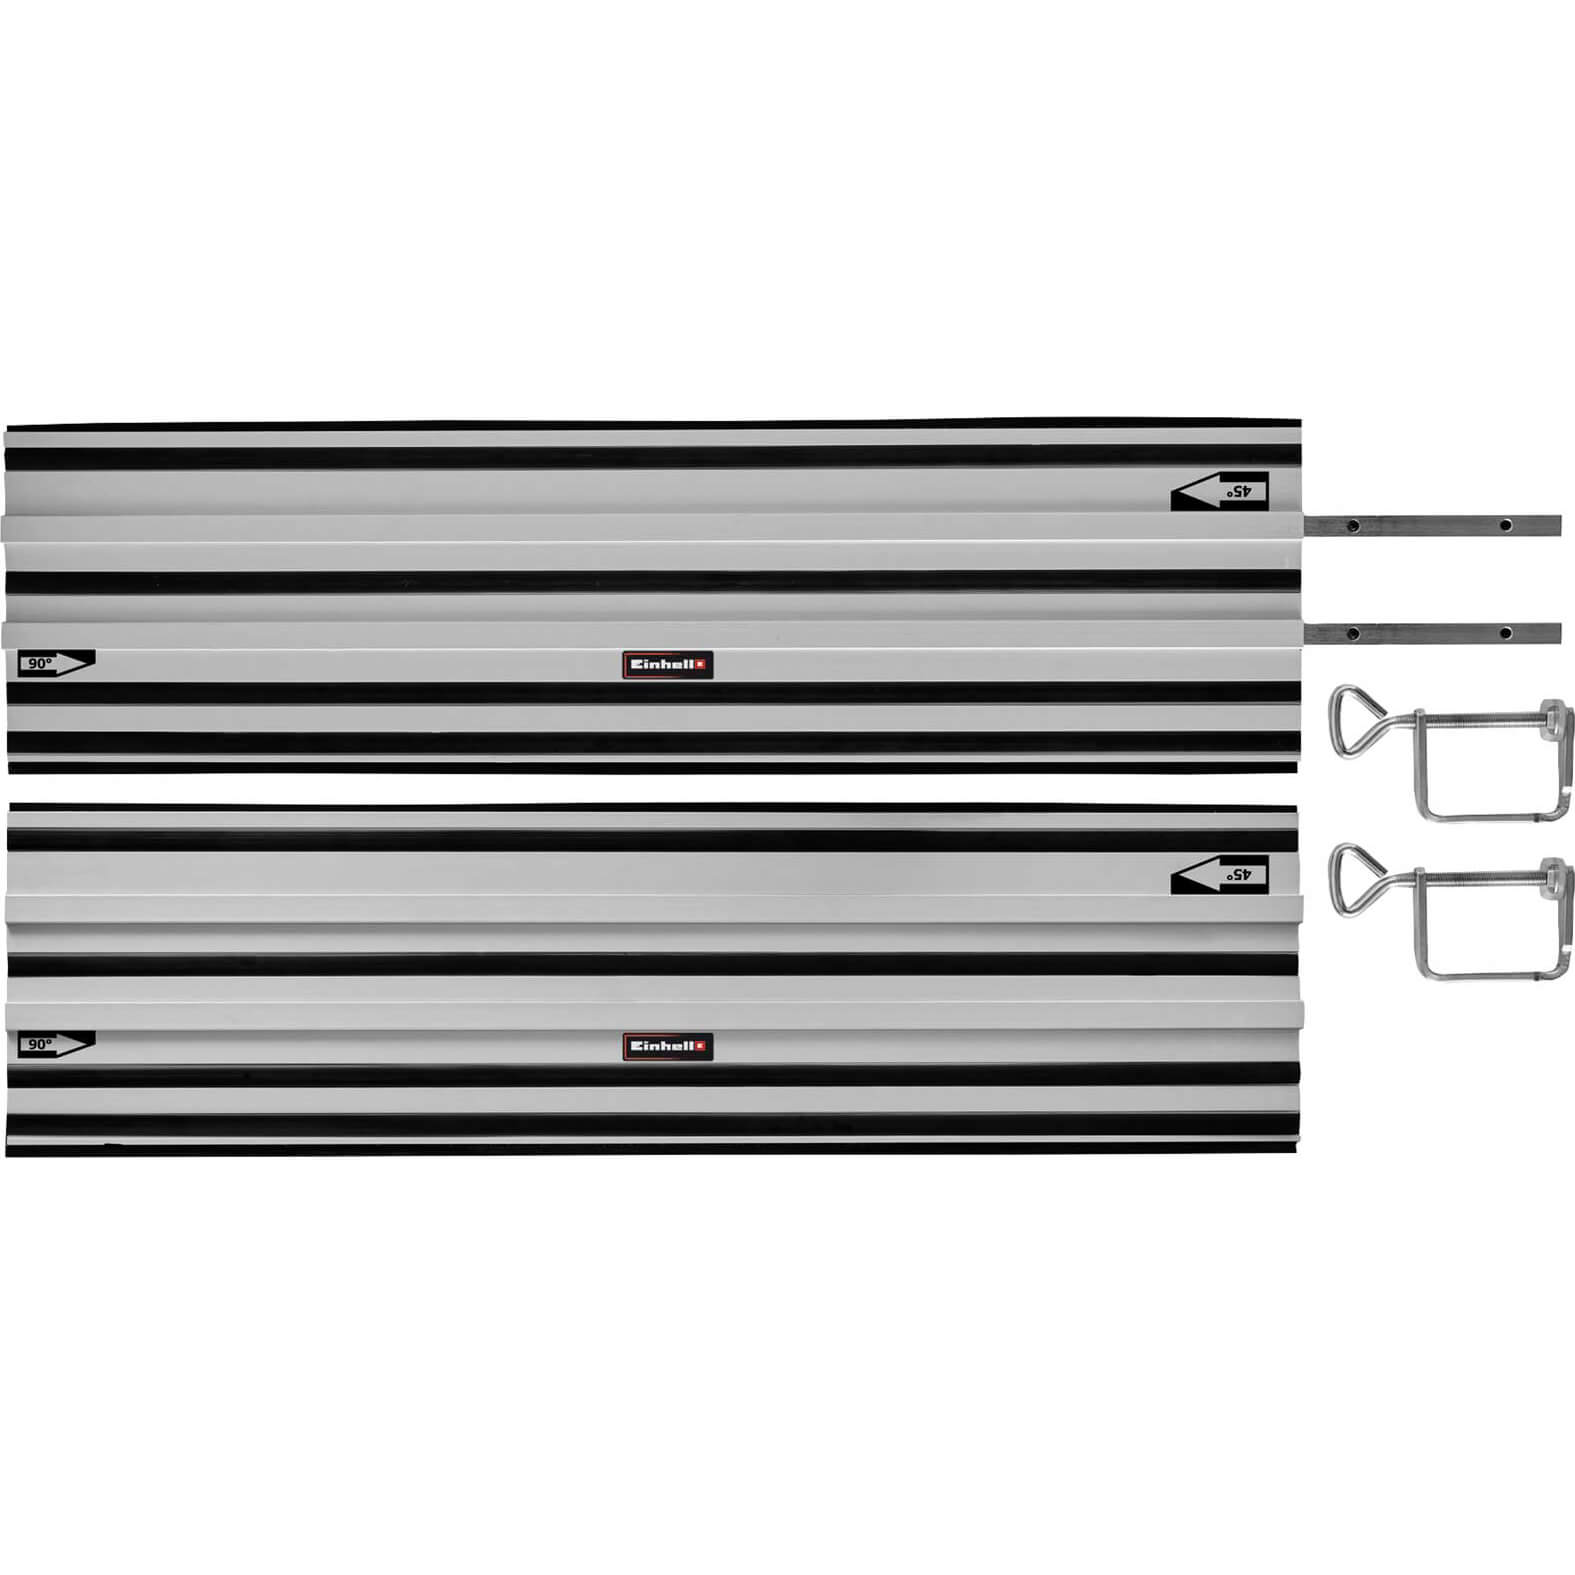 Image of Einhell Aluminium Guide Rails for Plunge Saws 1m Pack of 2